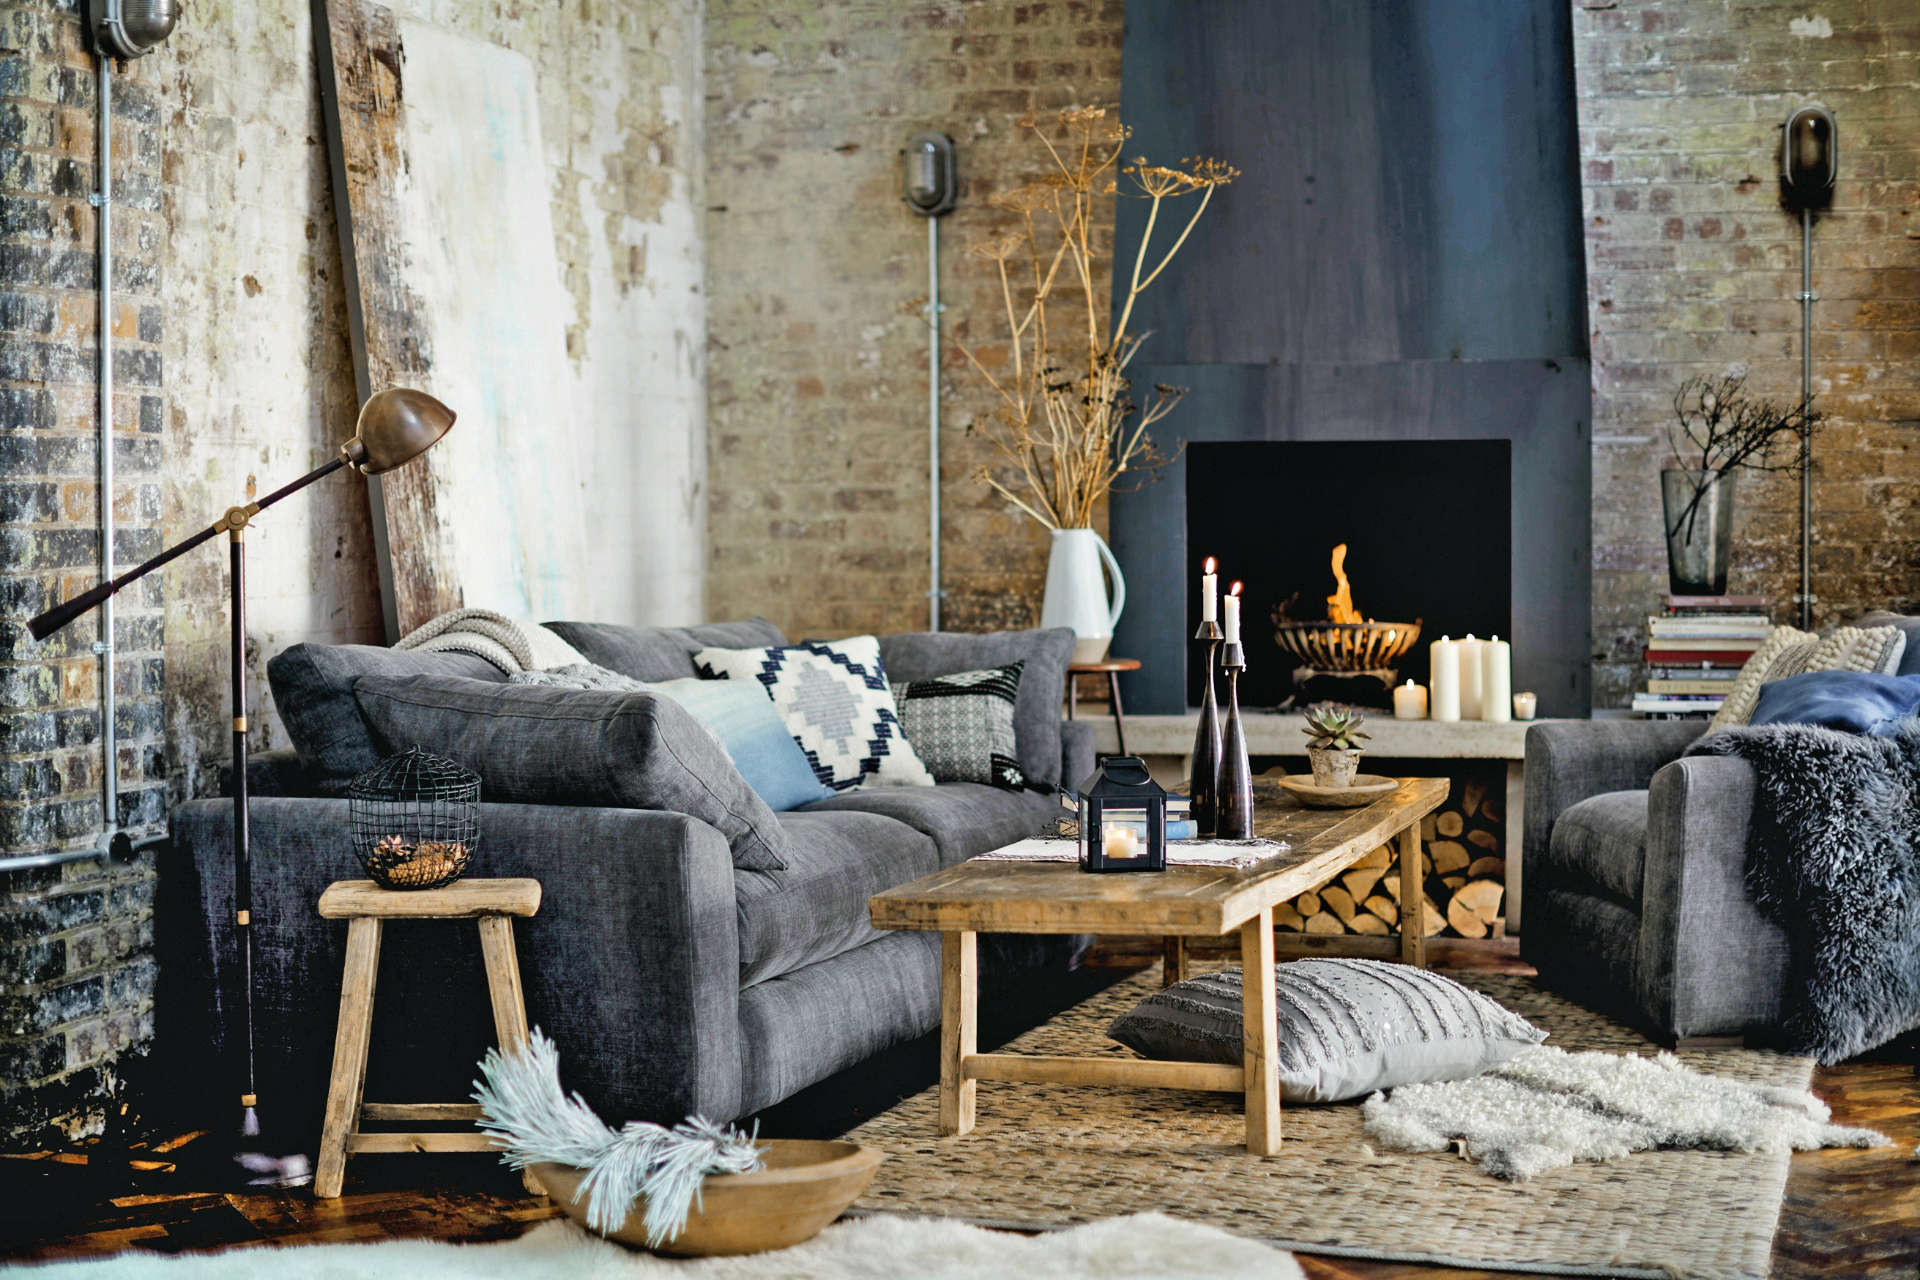 5 Hygge Home Ideas to Warm Your Personal Space